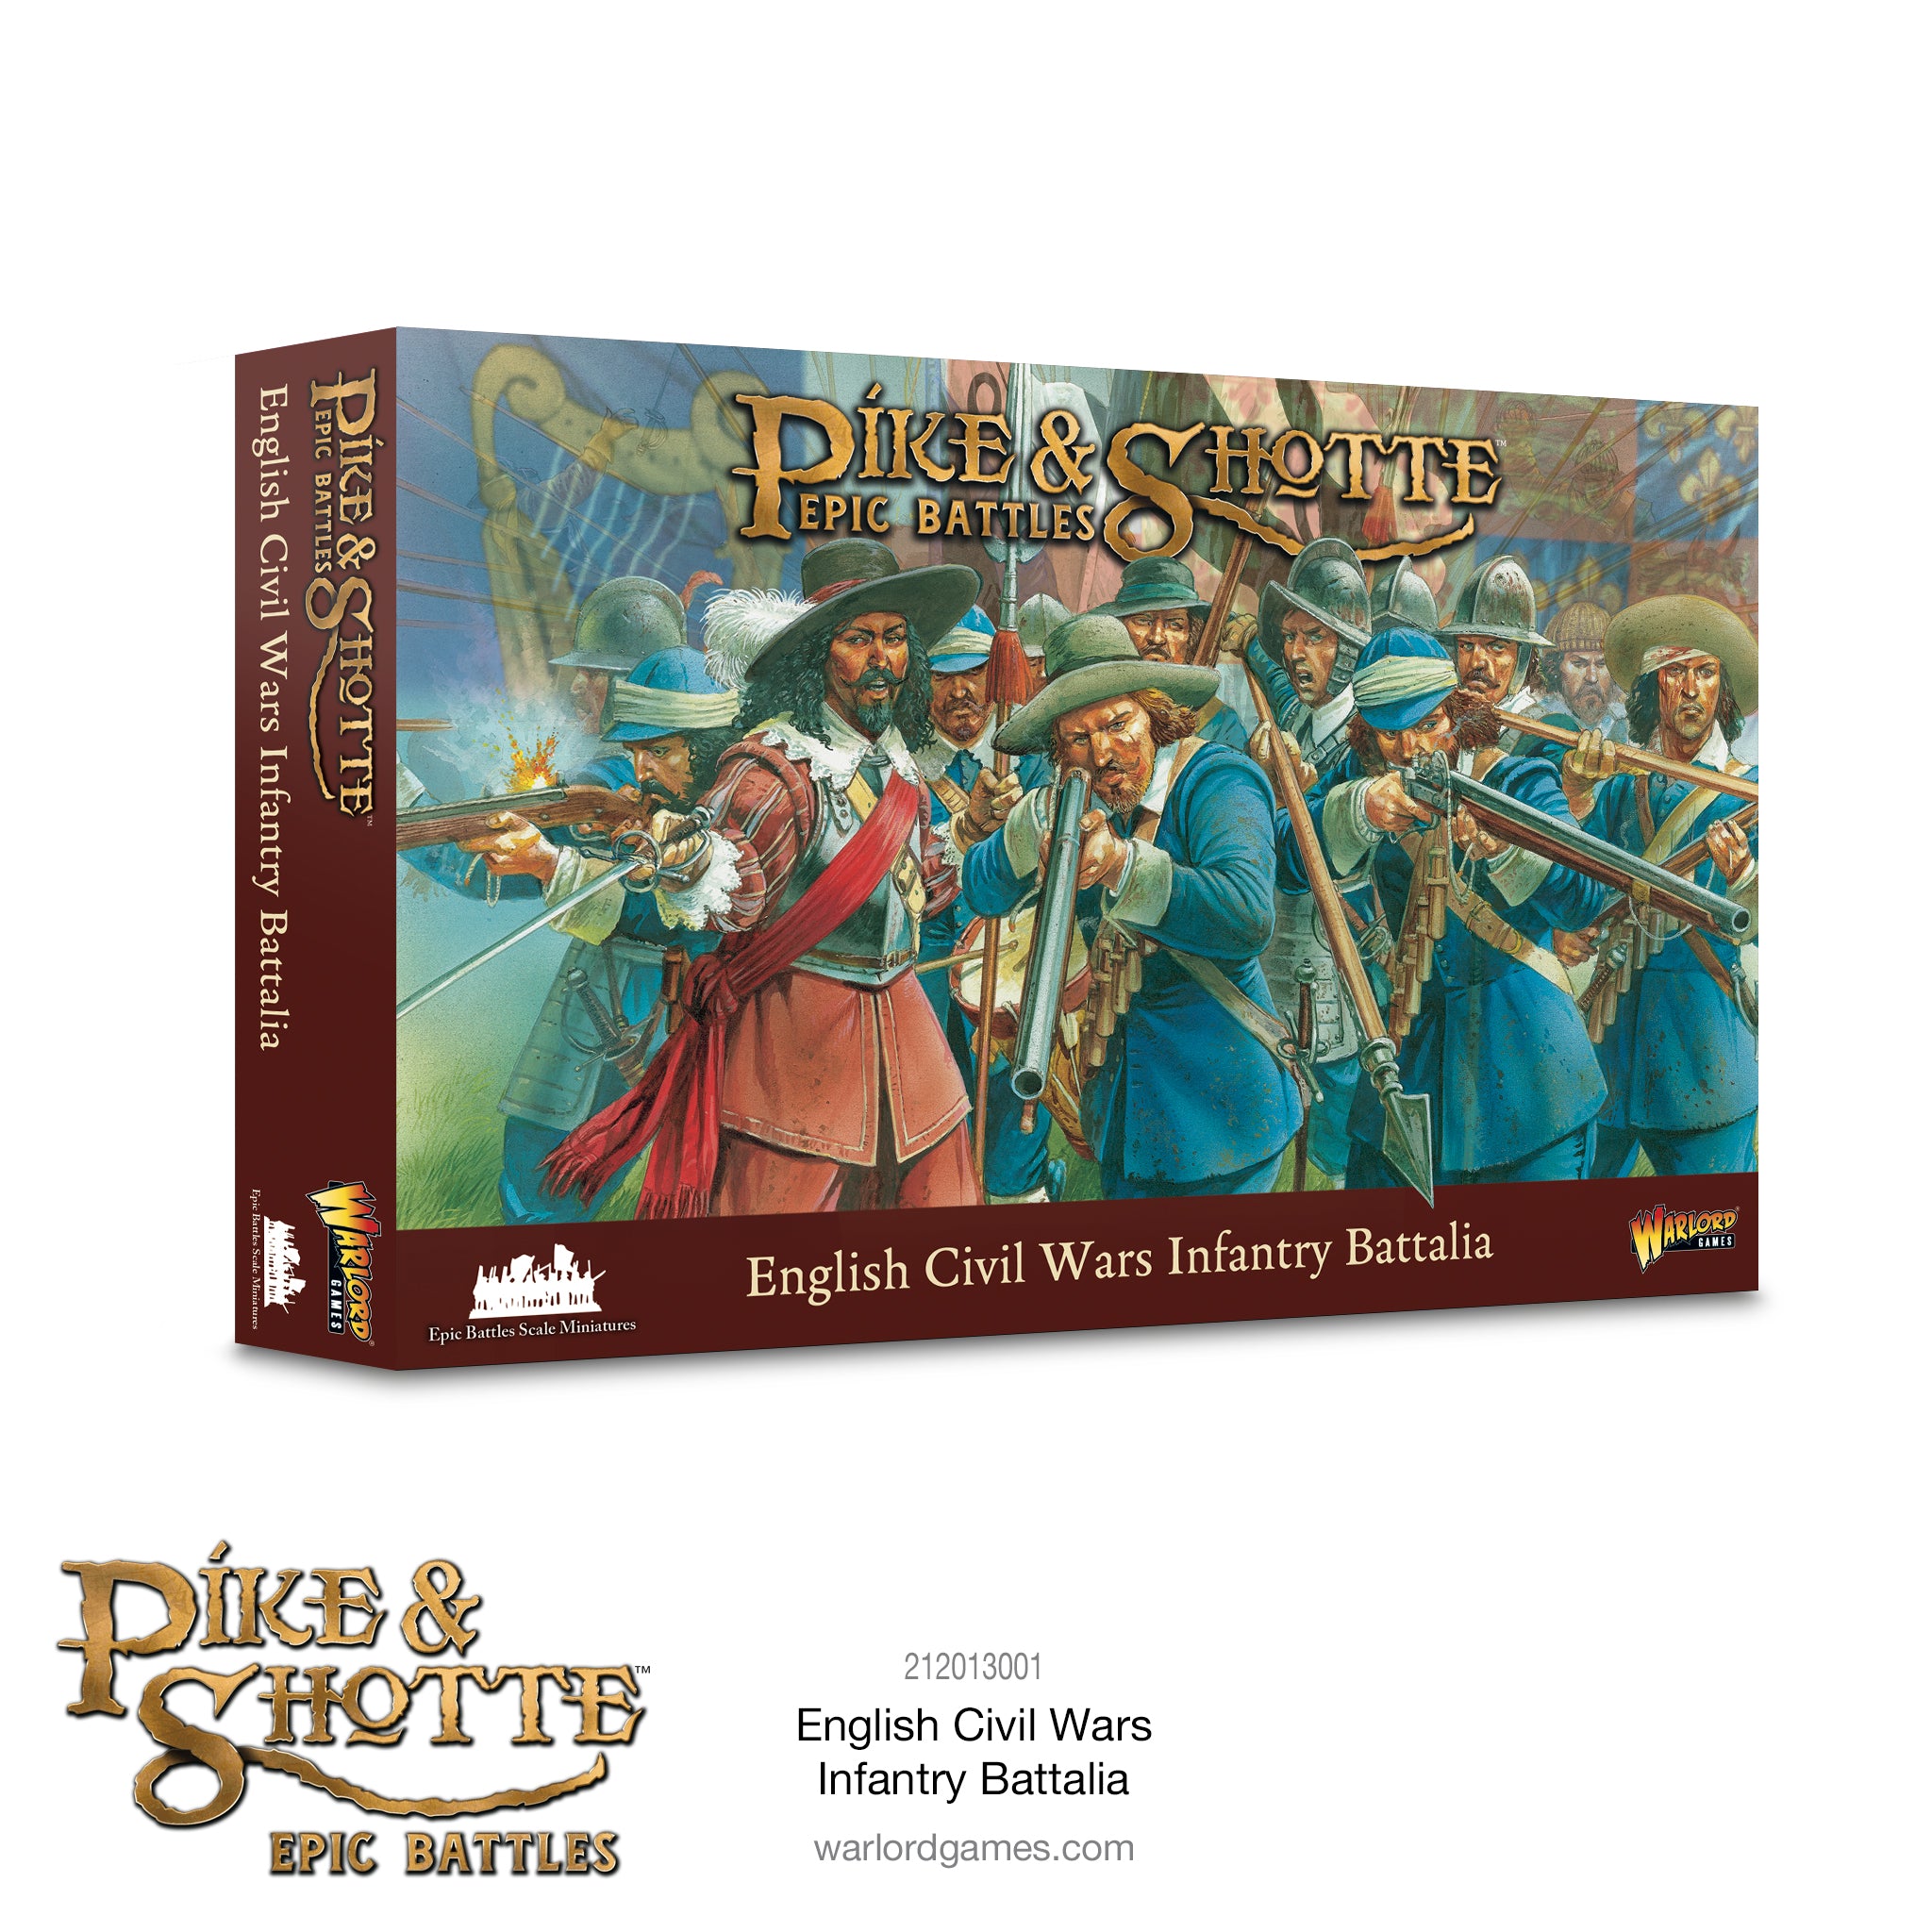 Pike and Shotte Epic Battles - English Civil Wars Infantry Battalia  -  Warlord Games